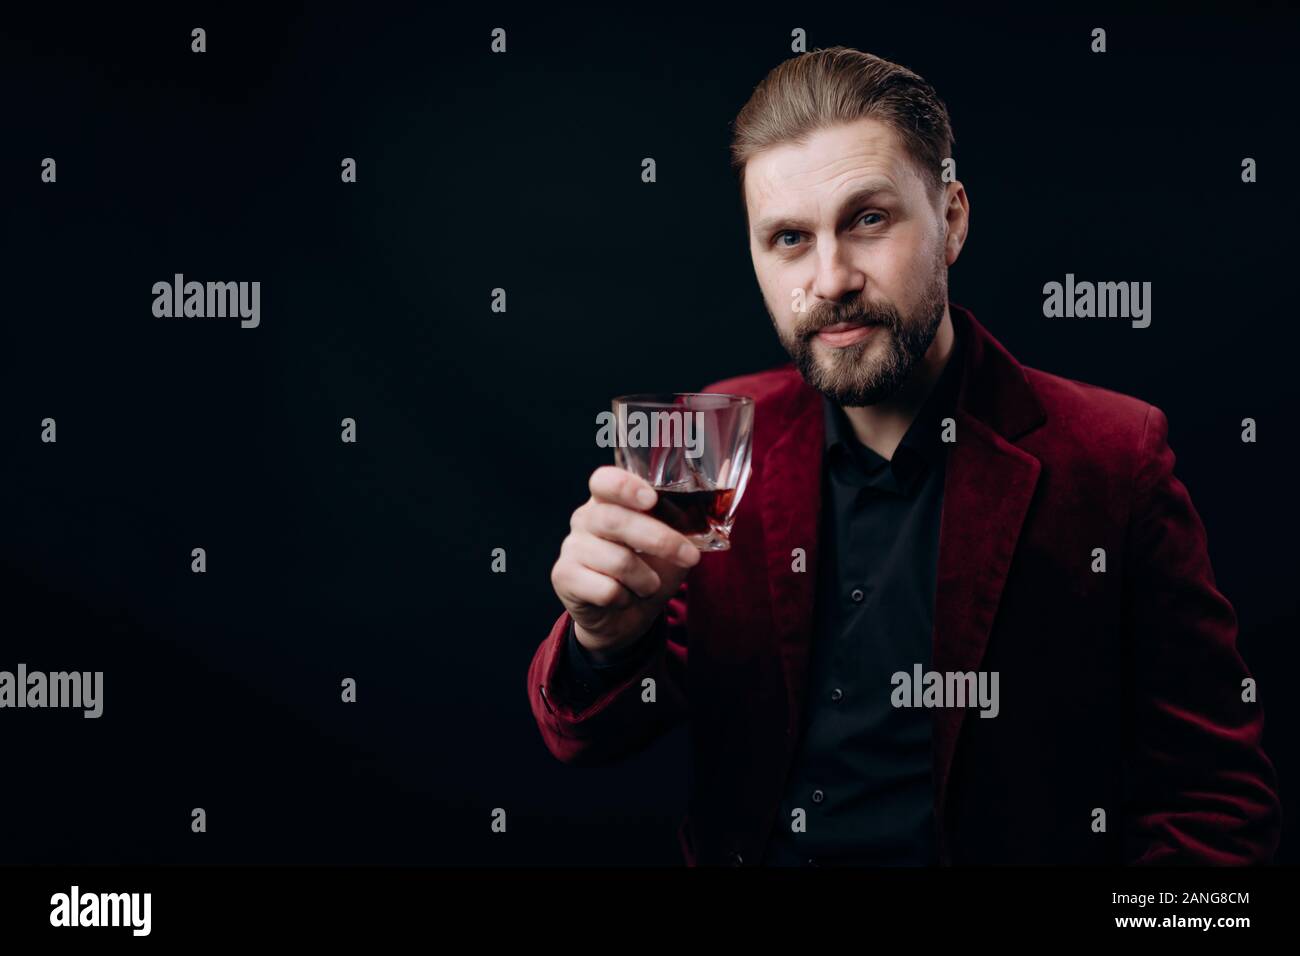 Stylish Man in Vinous Jacket Toasting With a Glass of Spirits Stock Photo